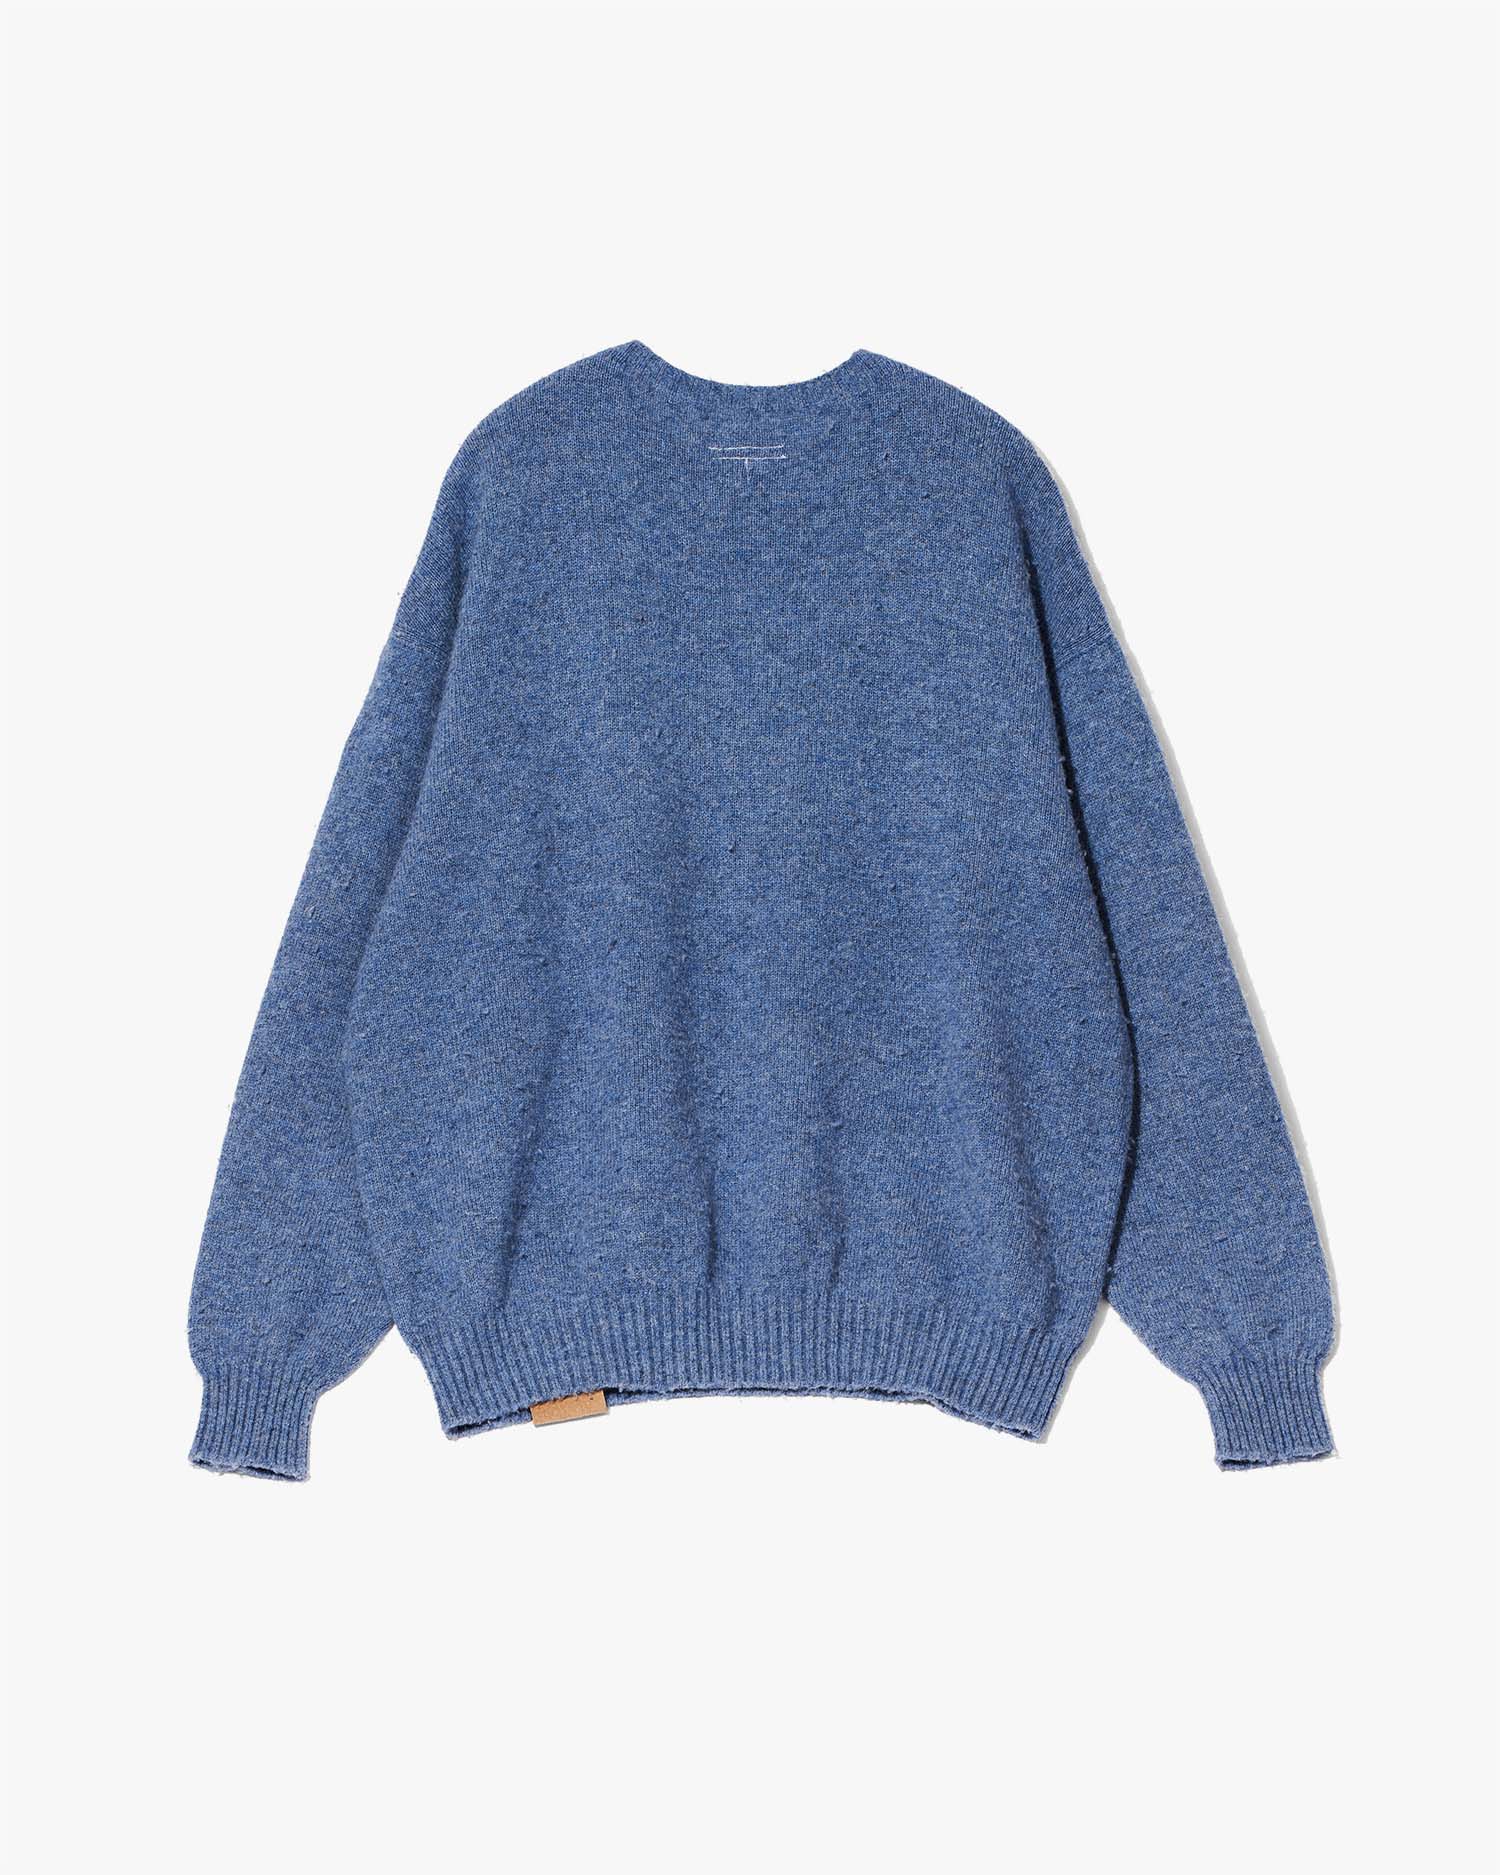 Pilled Aging Sweater